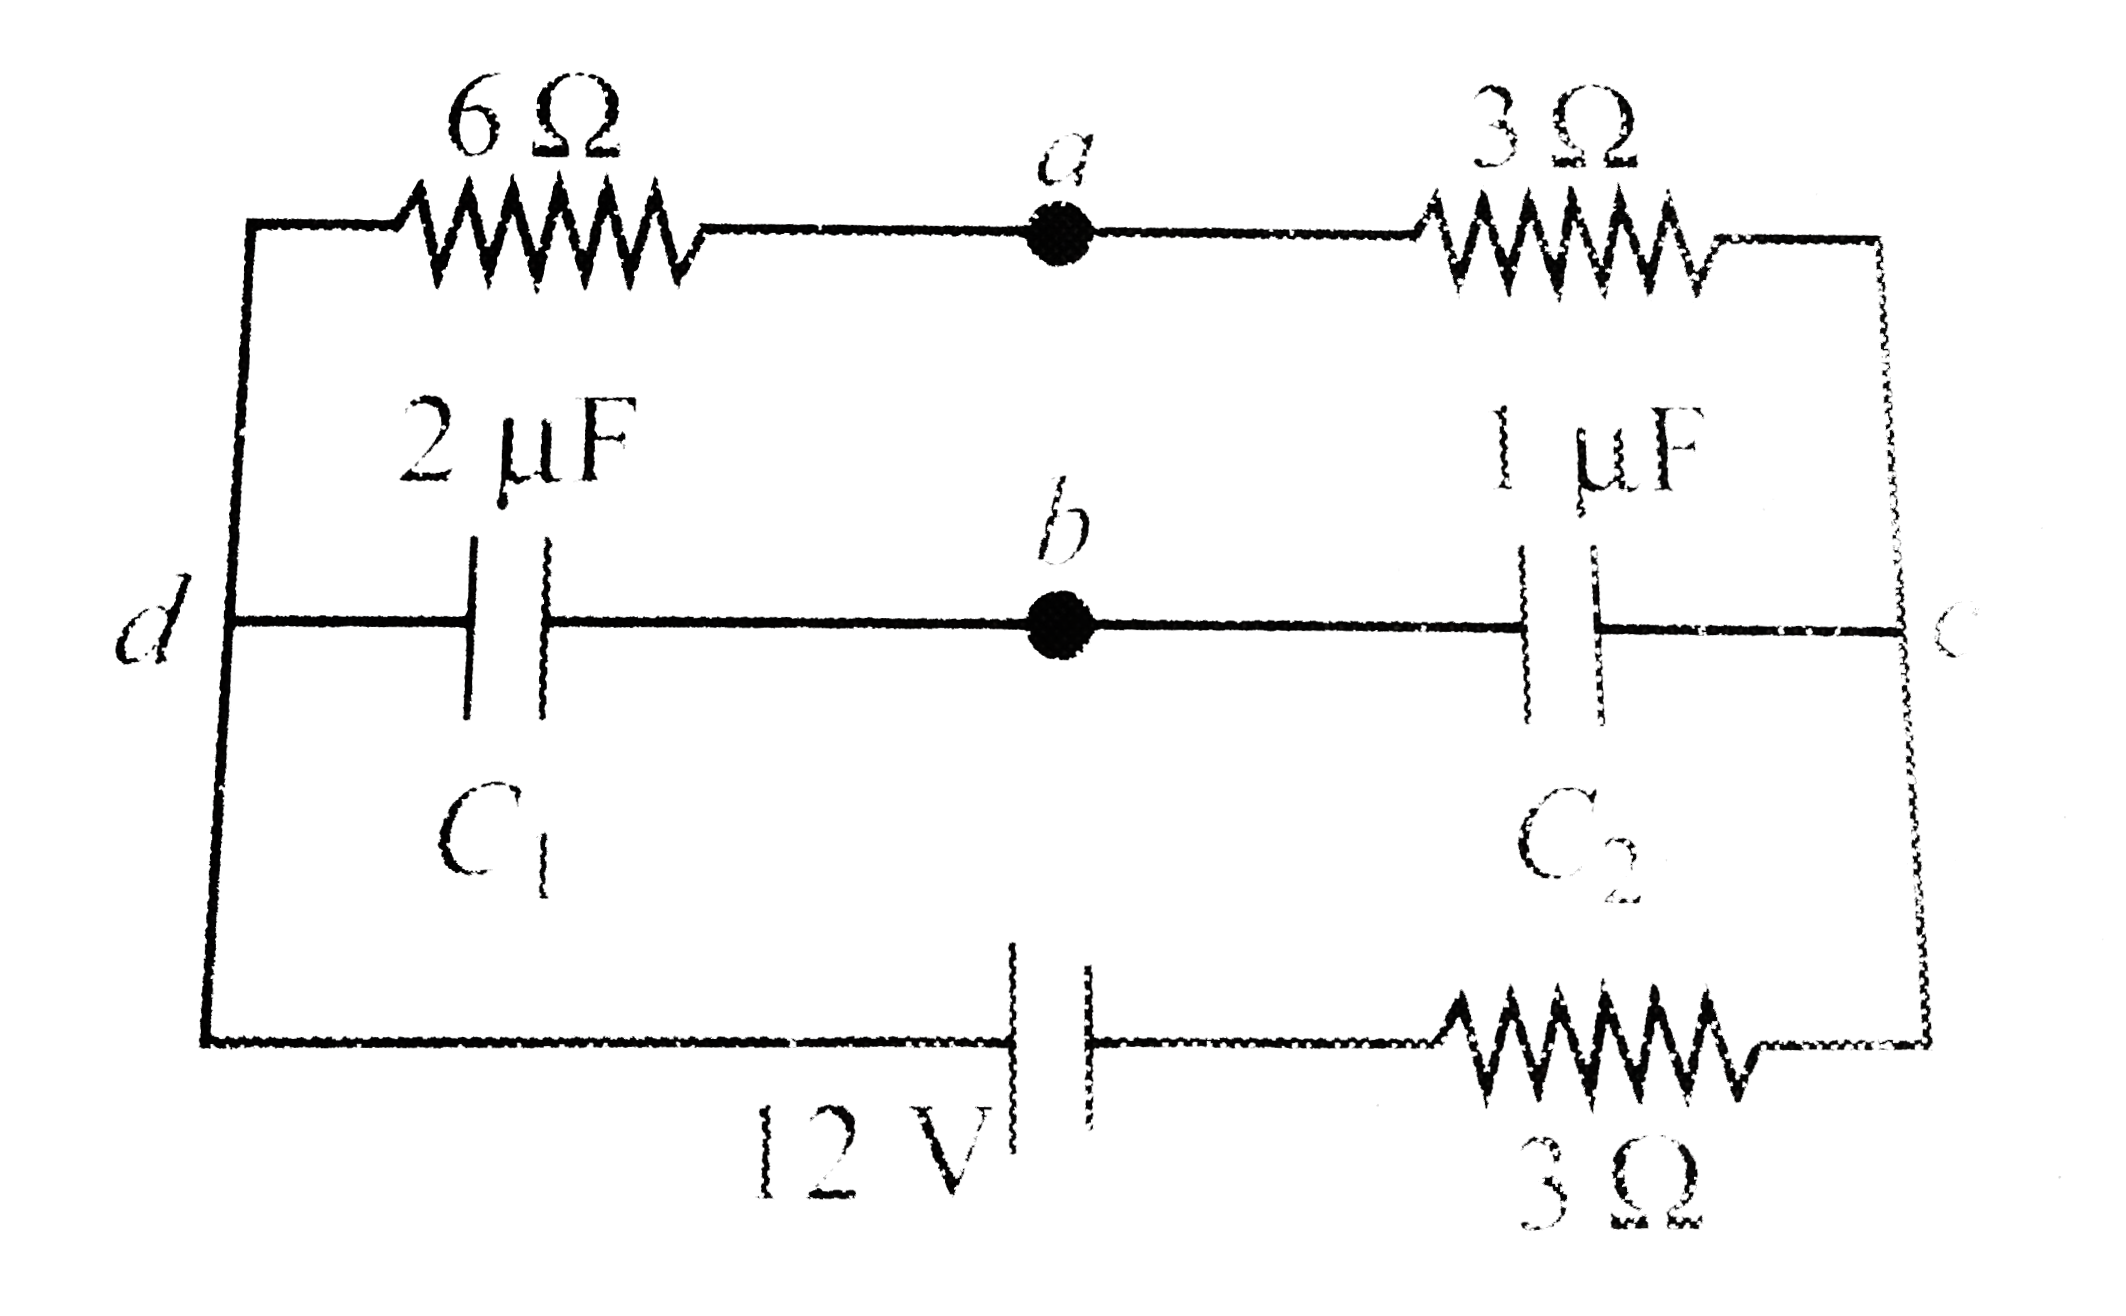 what is the charge stored on each capacitor C1 and C2 in the circuit shown in fig.